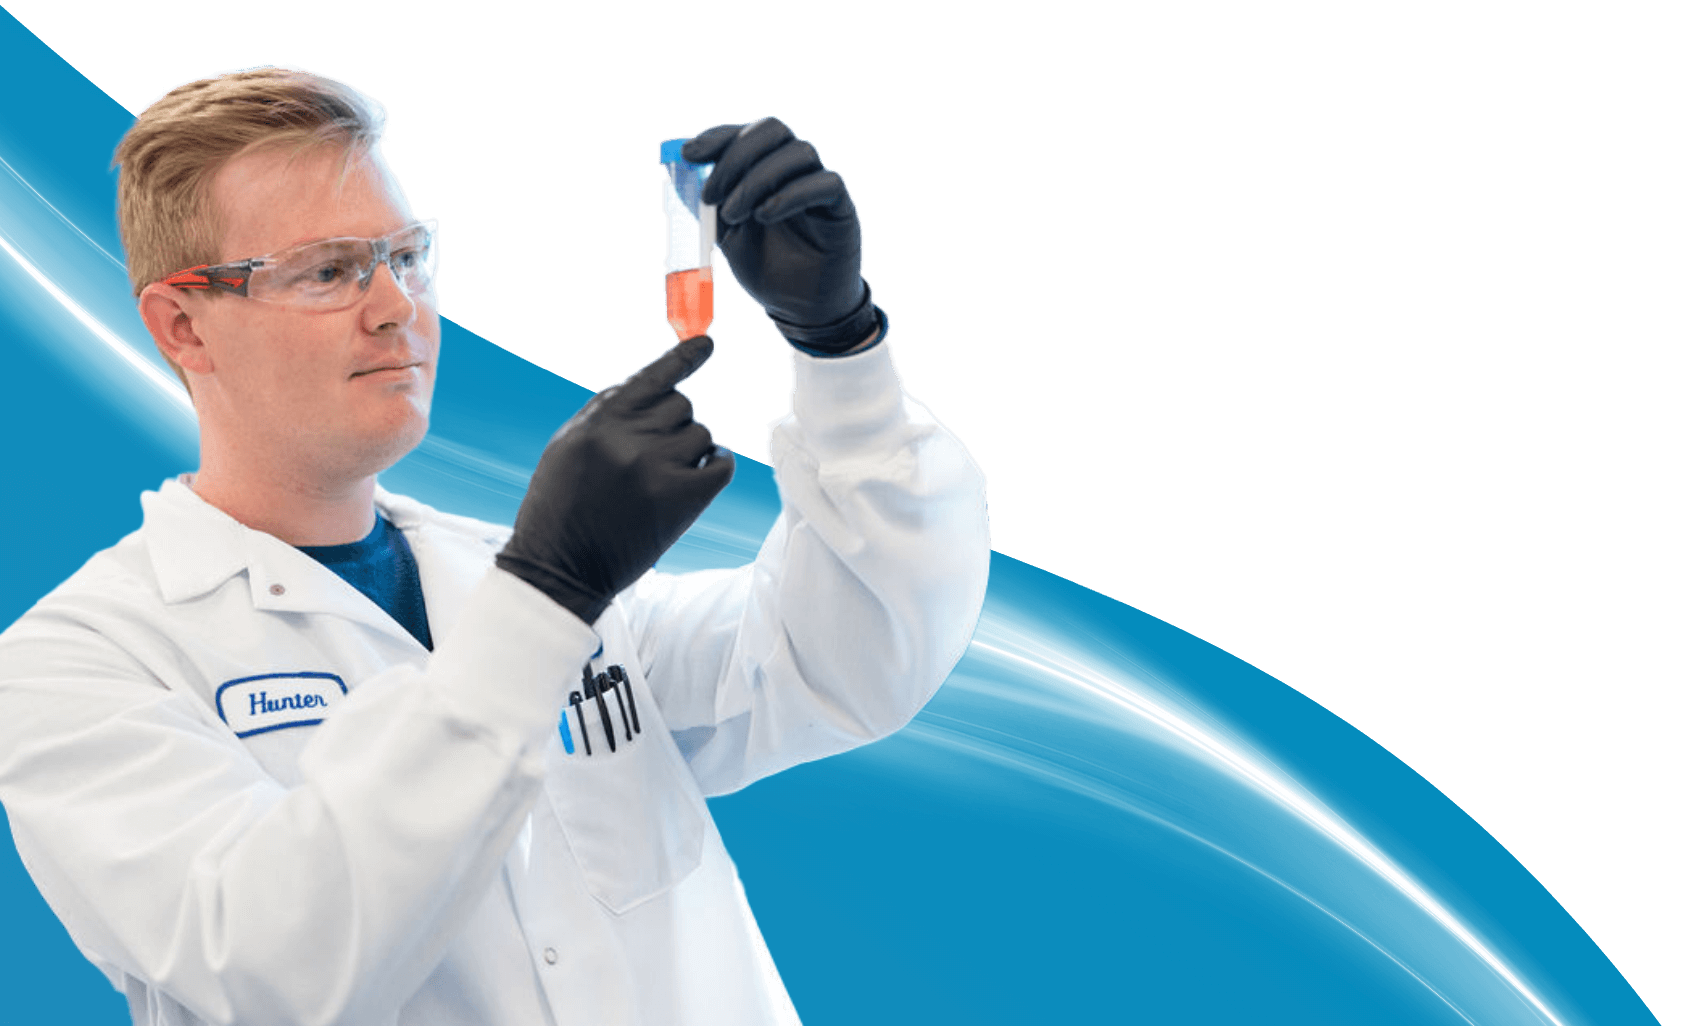 A cut-out image of a scientist wearing lab goggles, black gloves, and a white lab coat inspecting a tube of orange liquid, superimposed over a light blue wave background with a white light trail.